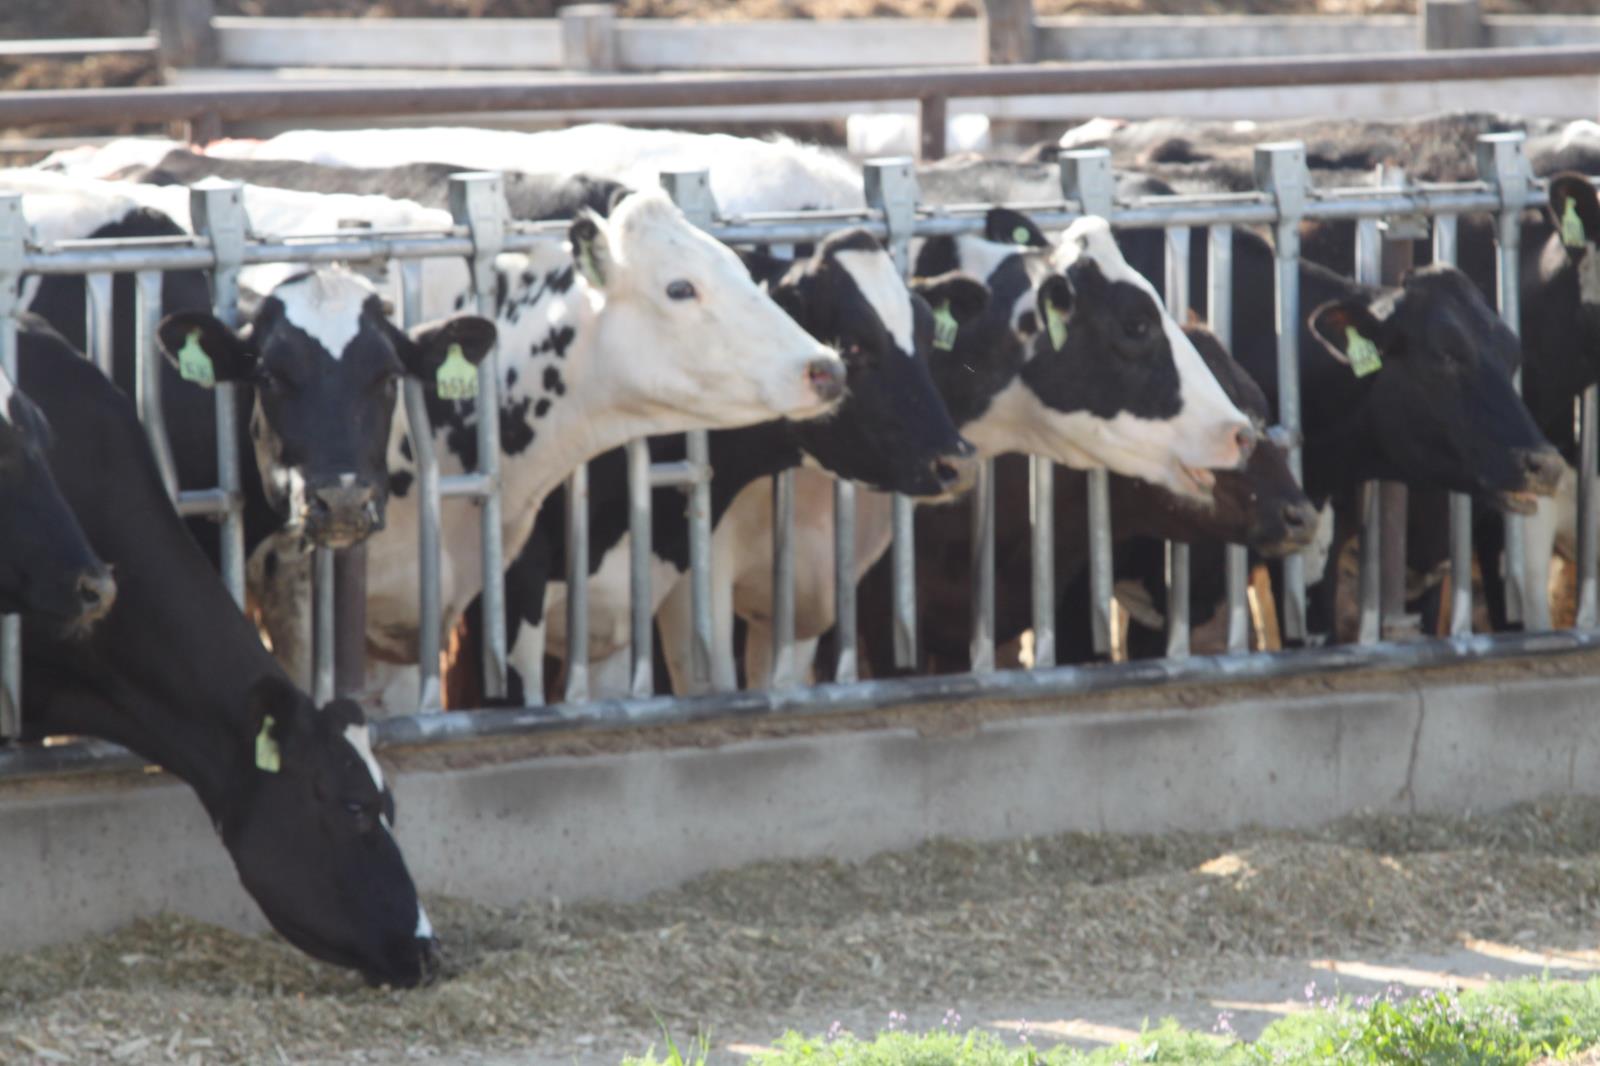 The total value of Idaho agricultural exports during the first quarter of 2019 increased 8 percent compared with the same period in 2018. Idaho dairy product exports rose 14 percent to $57 million during the first quarter. 